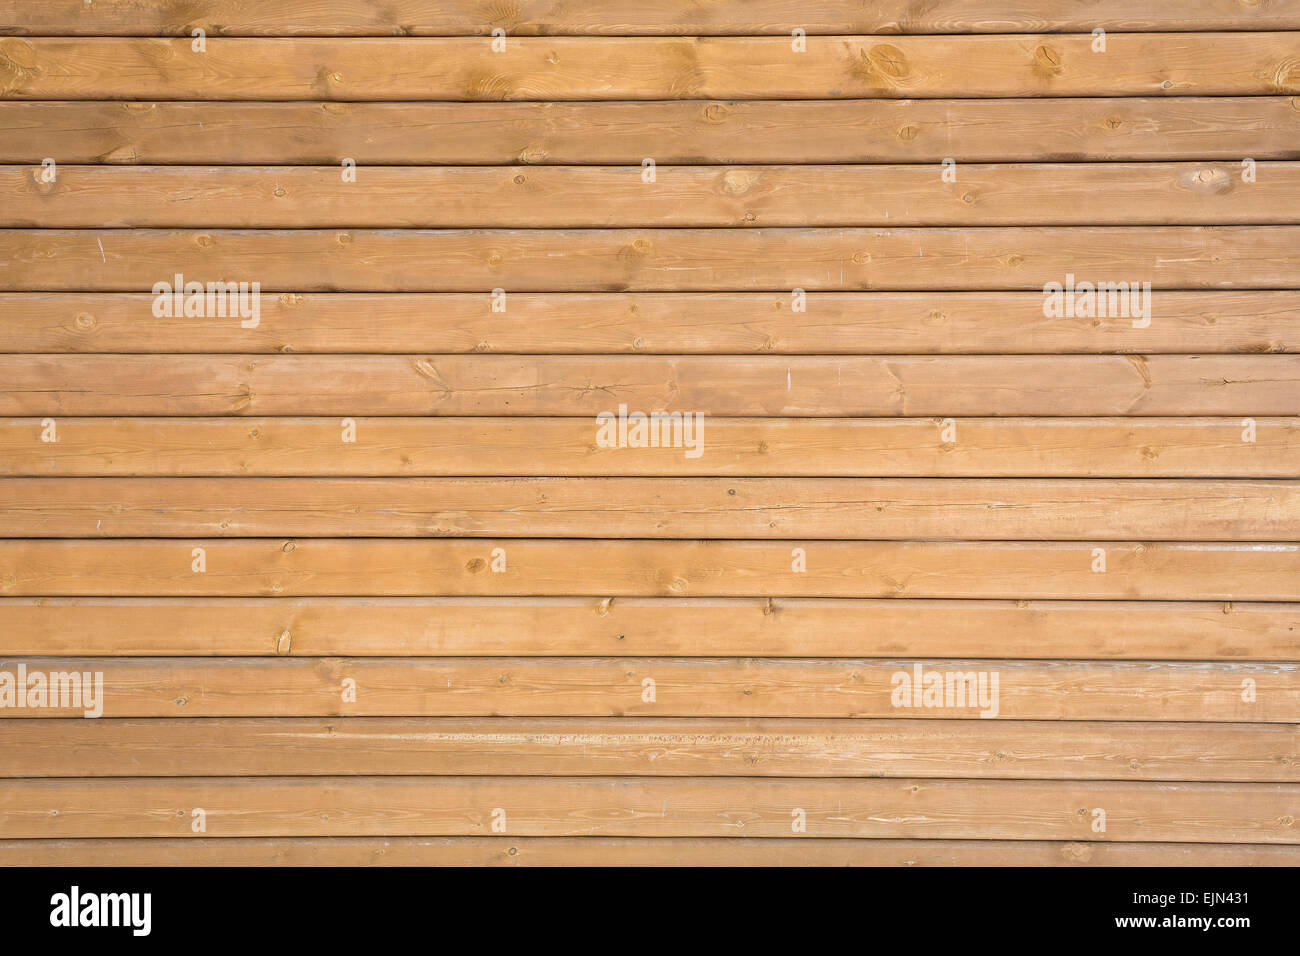 old wood planks texture or background Stock Photo